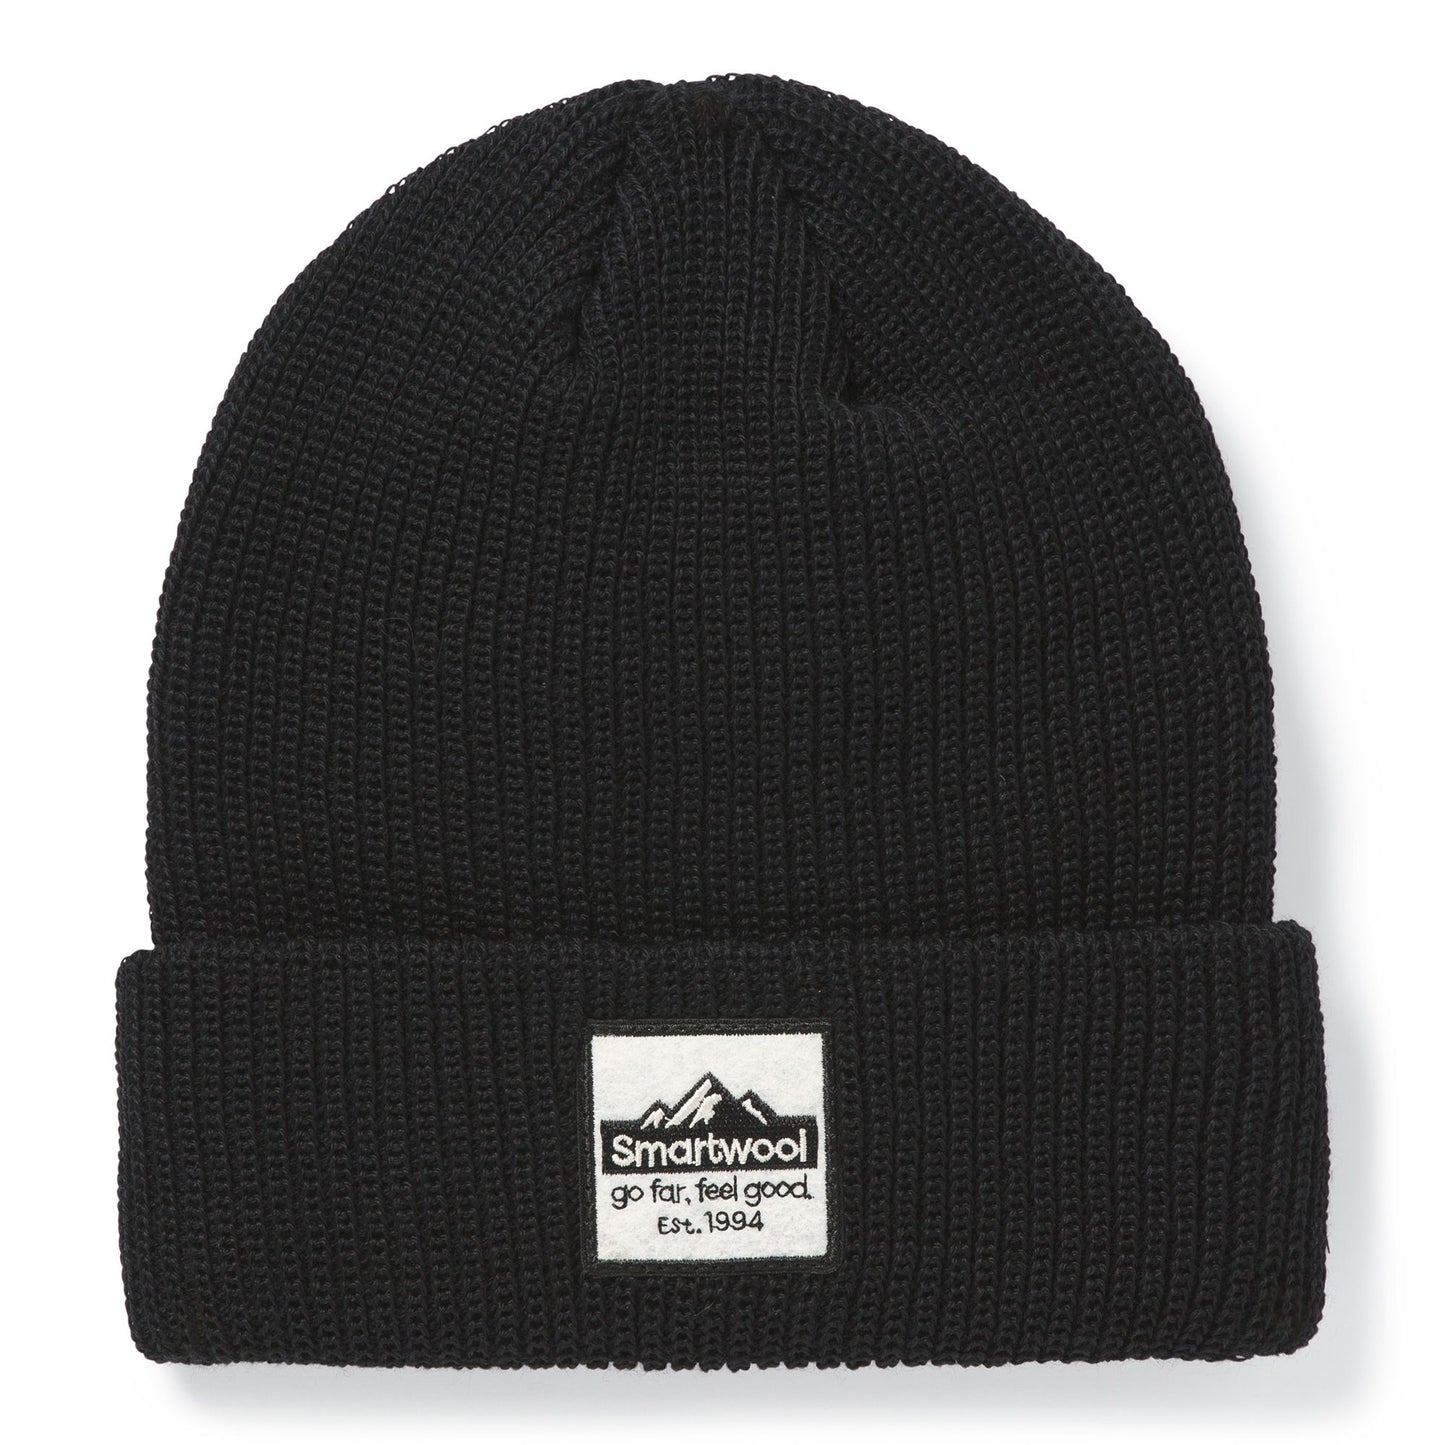 Smartwool Unisex Patch Beanie